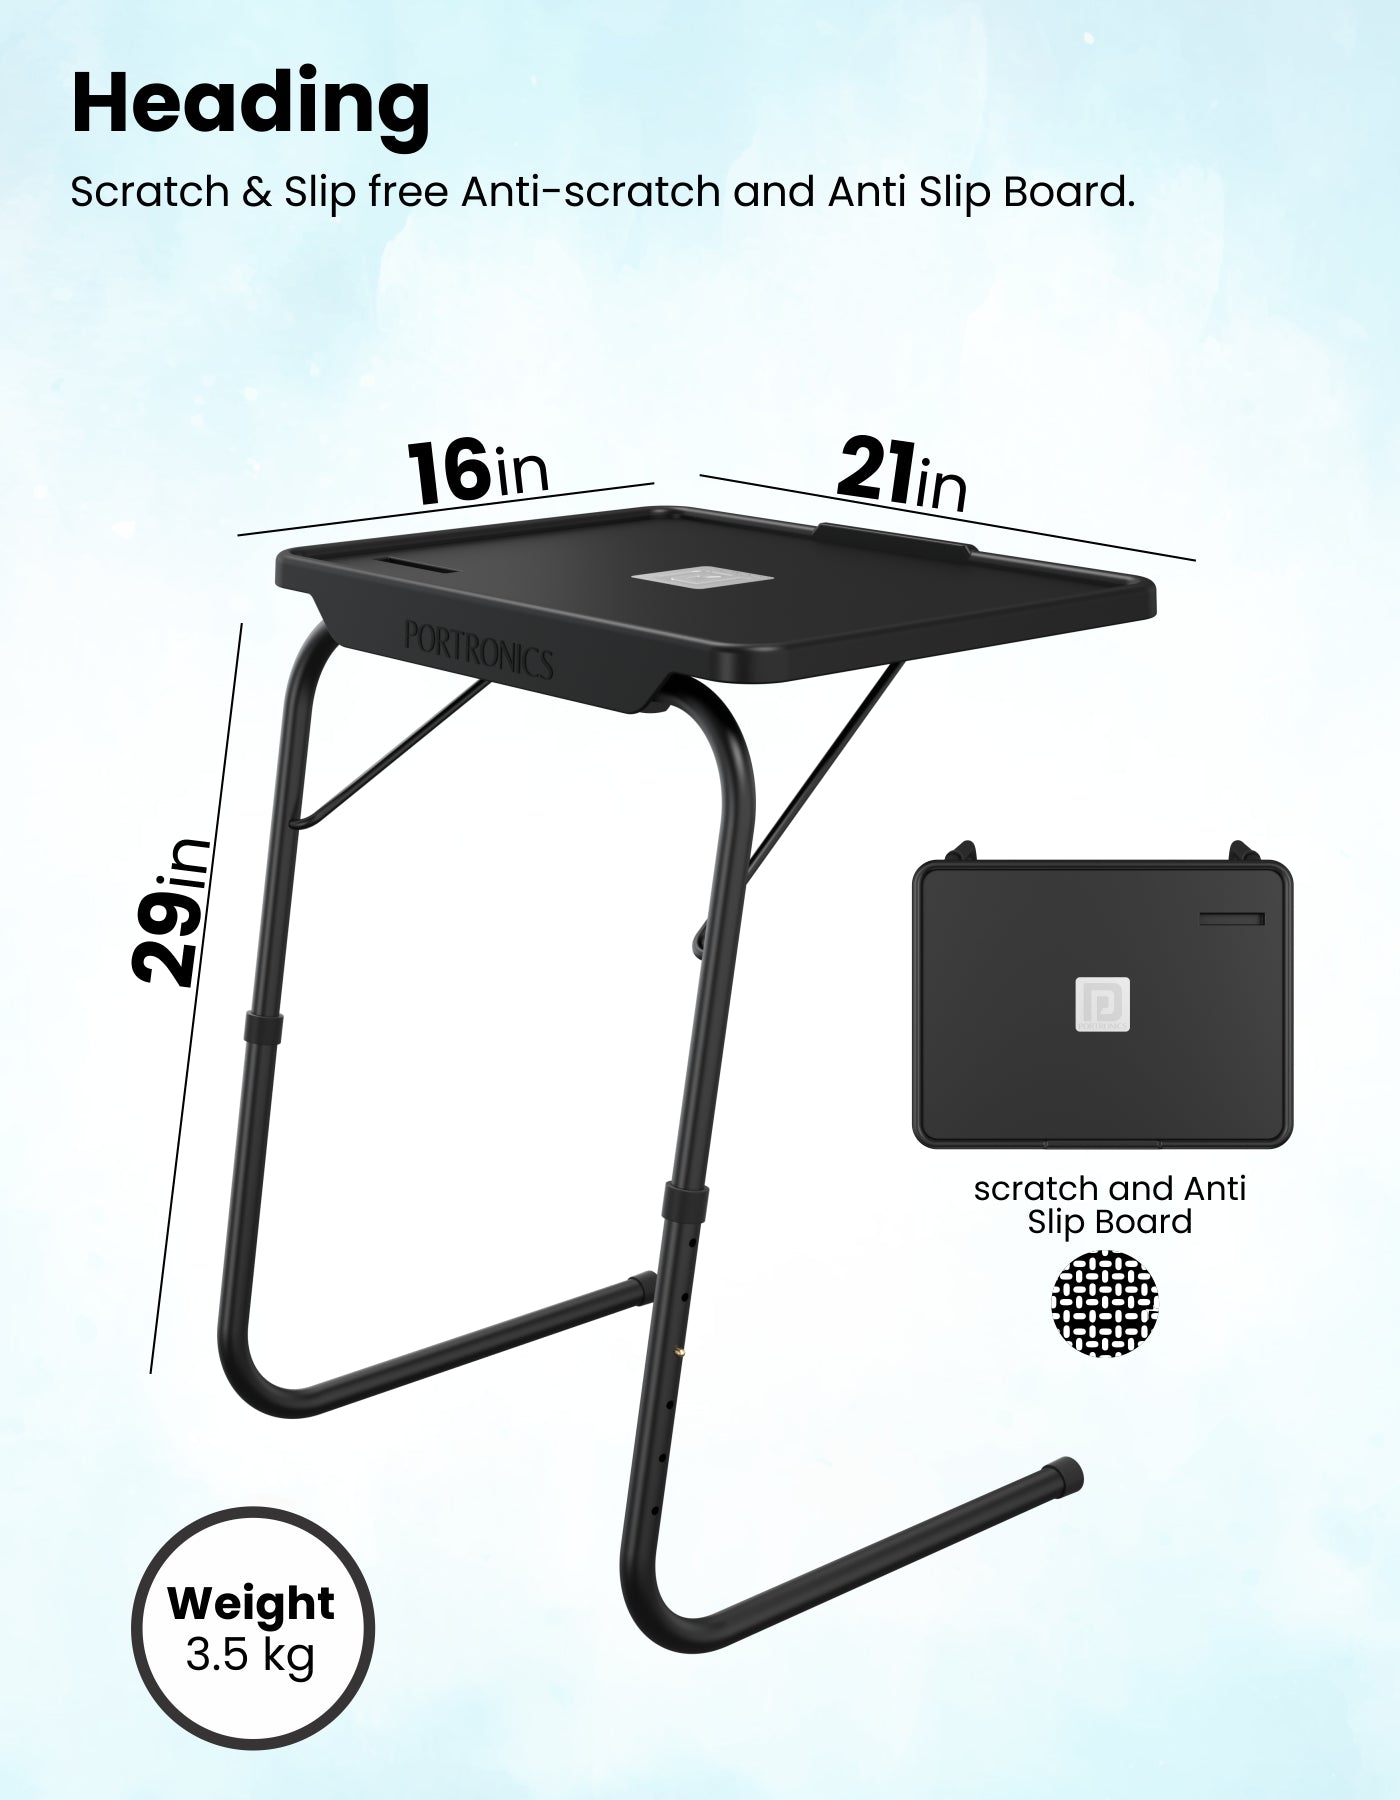 Aluminium alloy legs of Portronics My Buddy F adjustable and portable Laptop Stand for bed